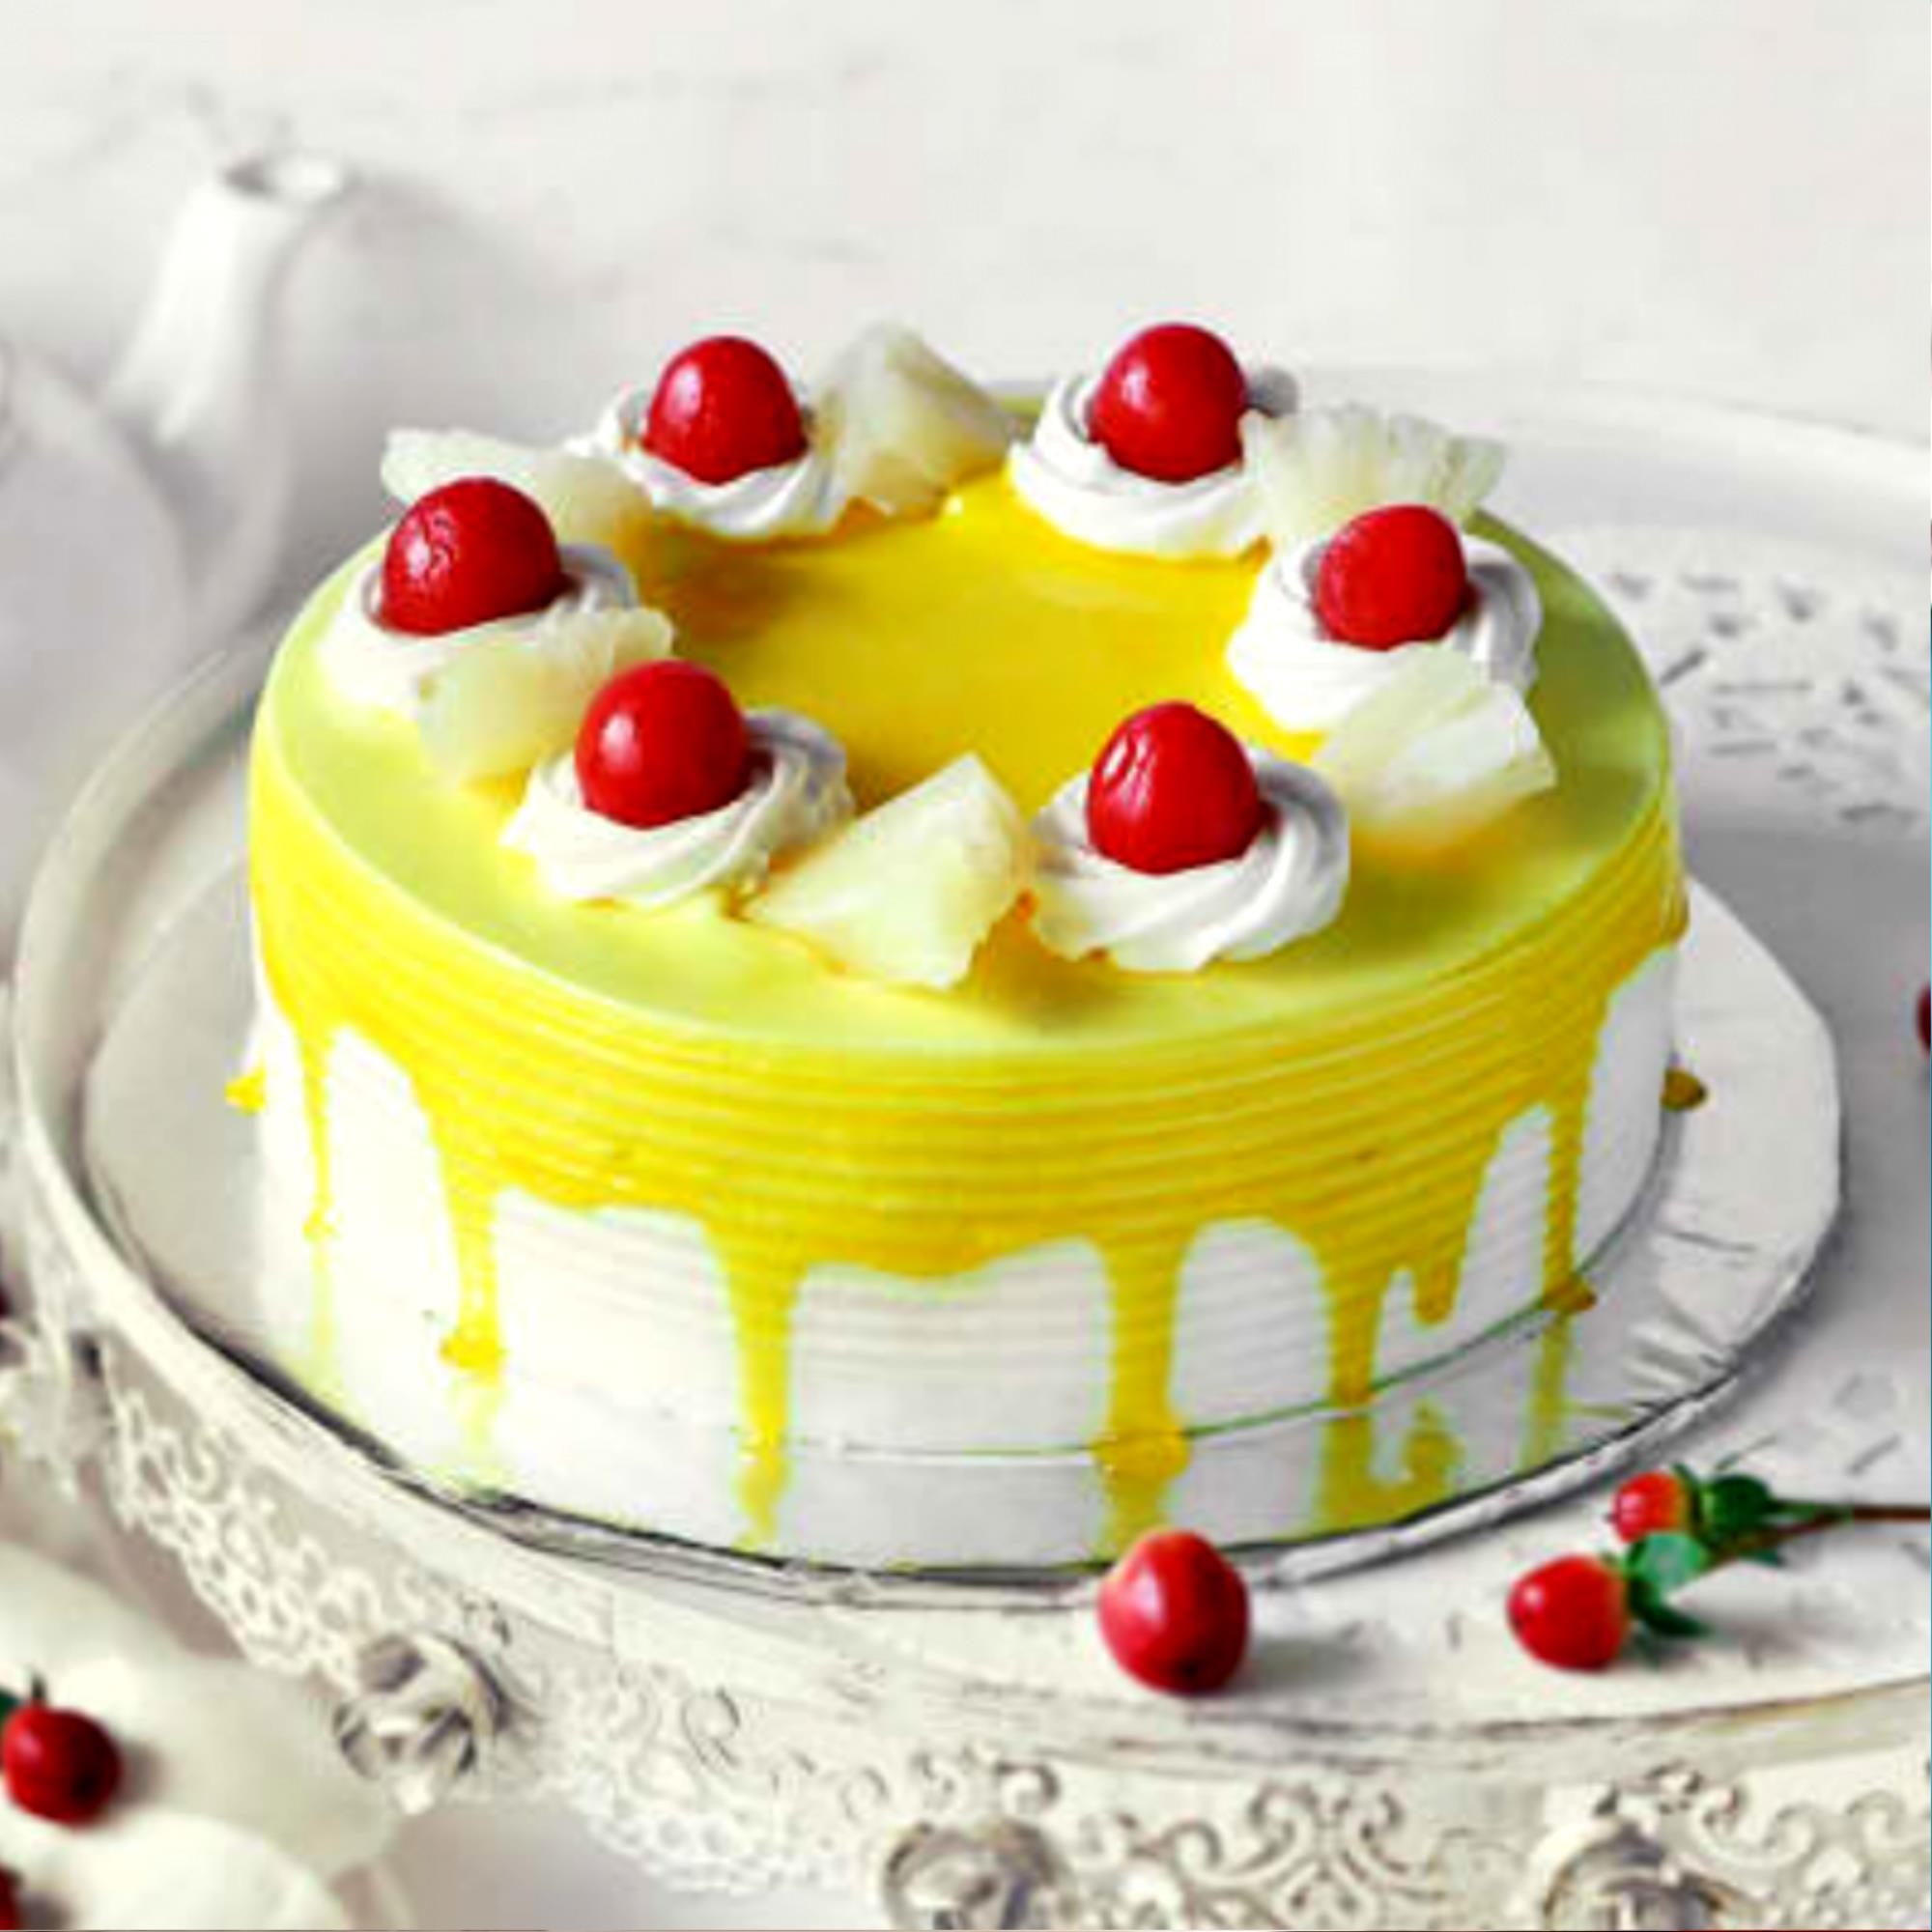 Pineapple cake | Lucknow | Kanpur